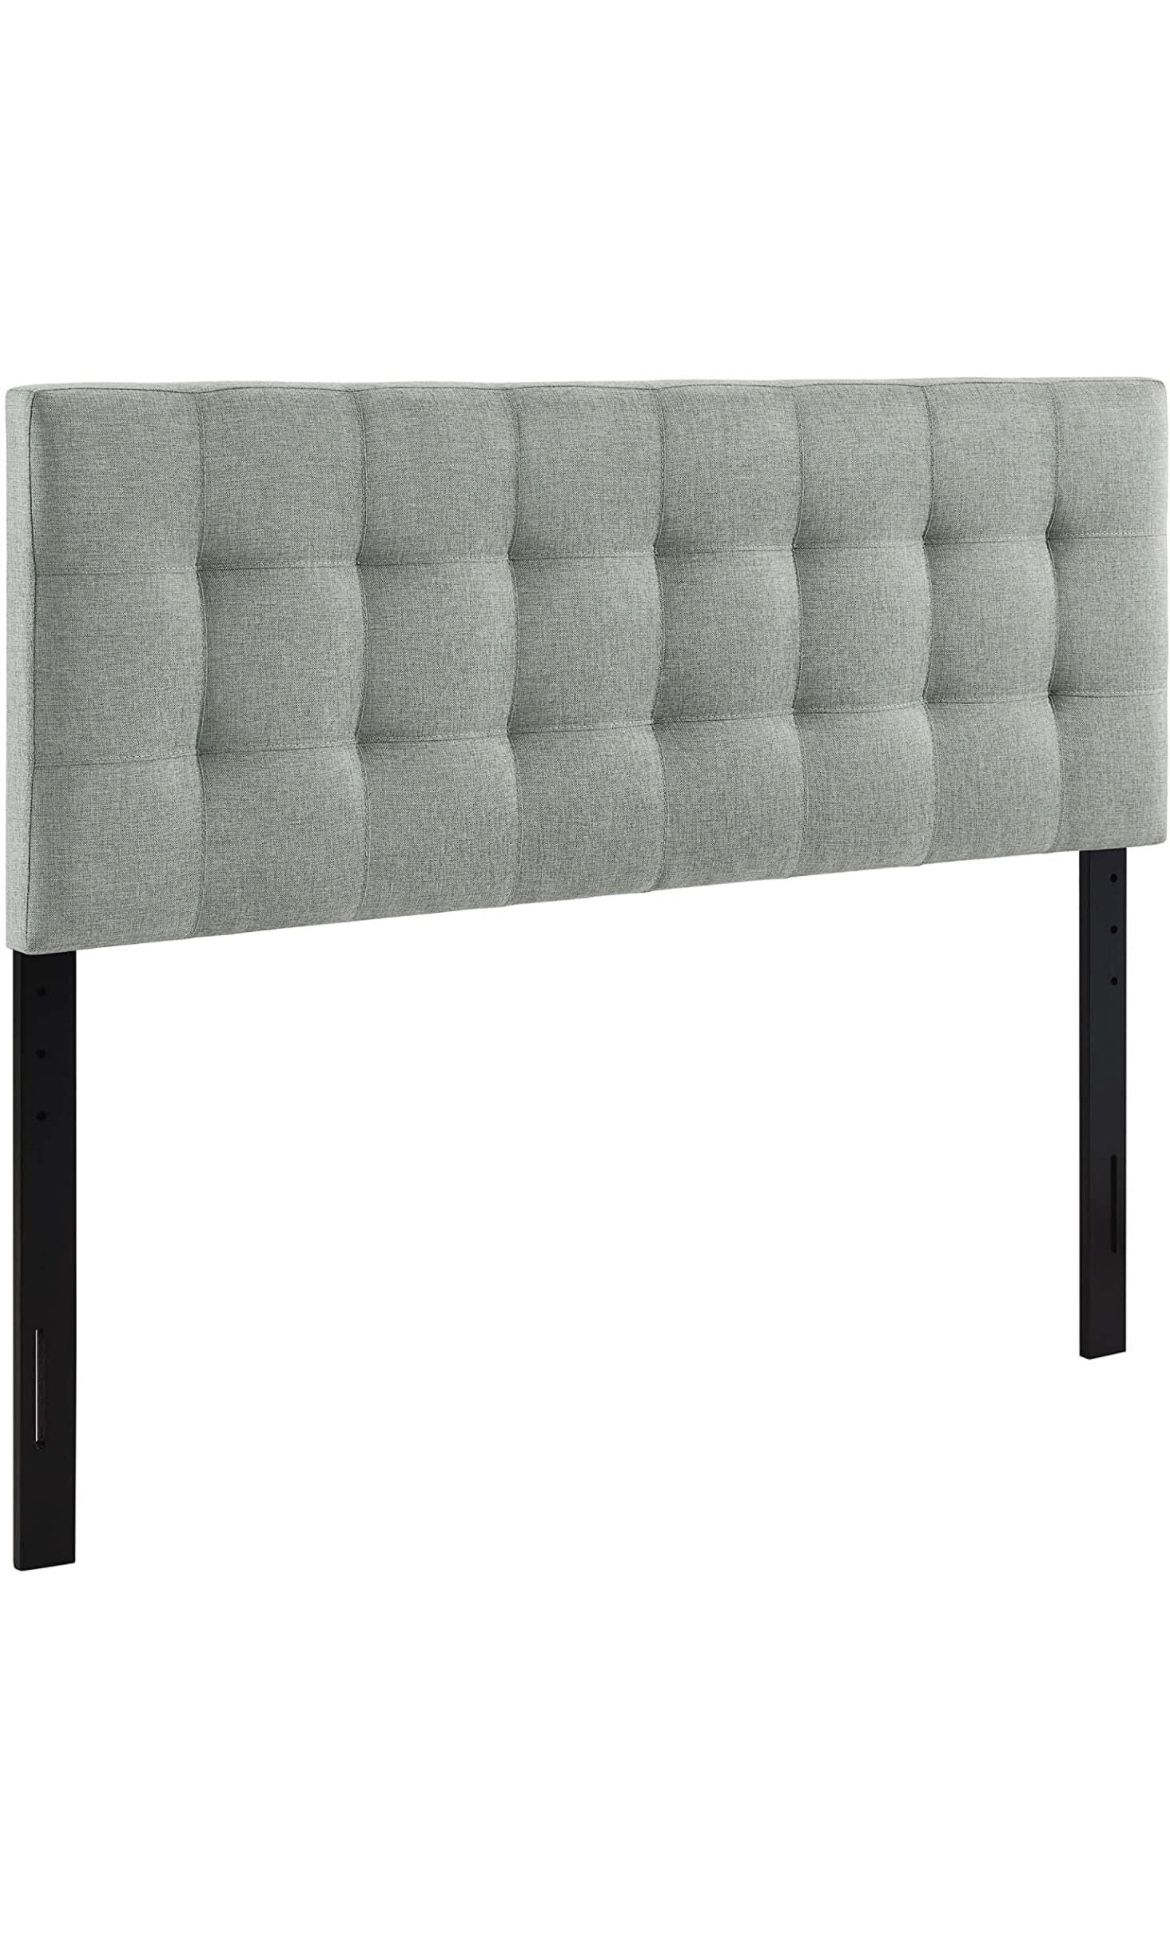 Tufted Linen Fabric Upholstered Queen Headboard in Gray